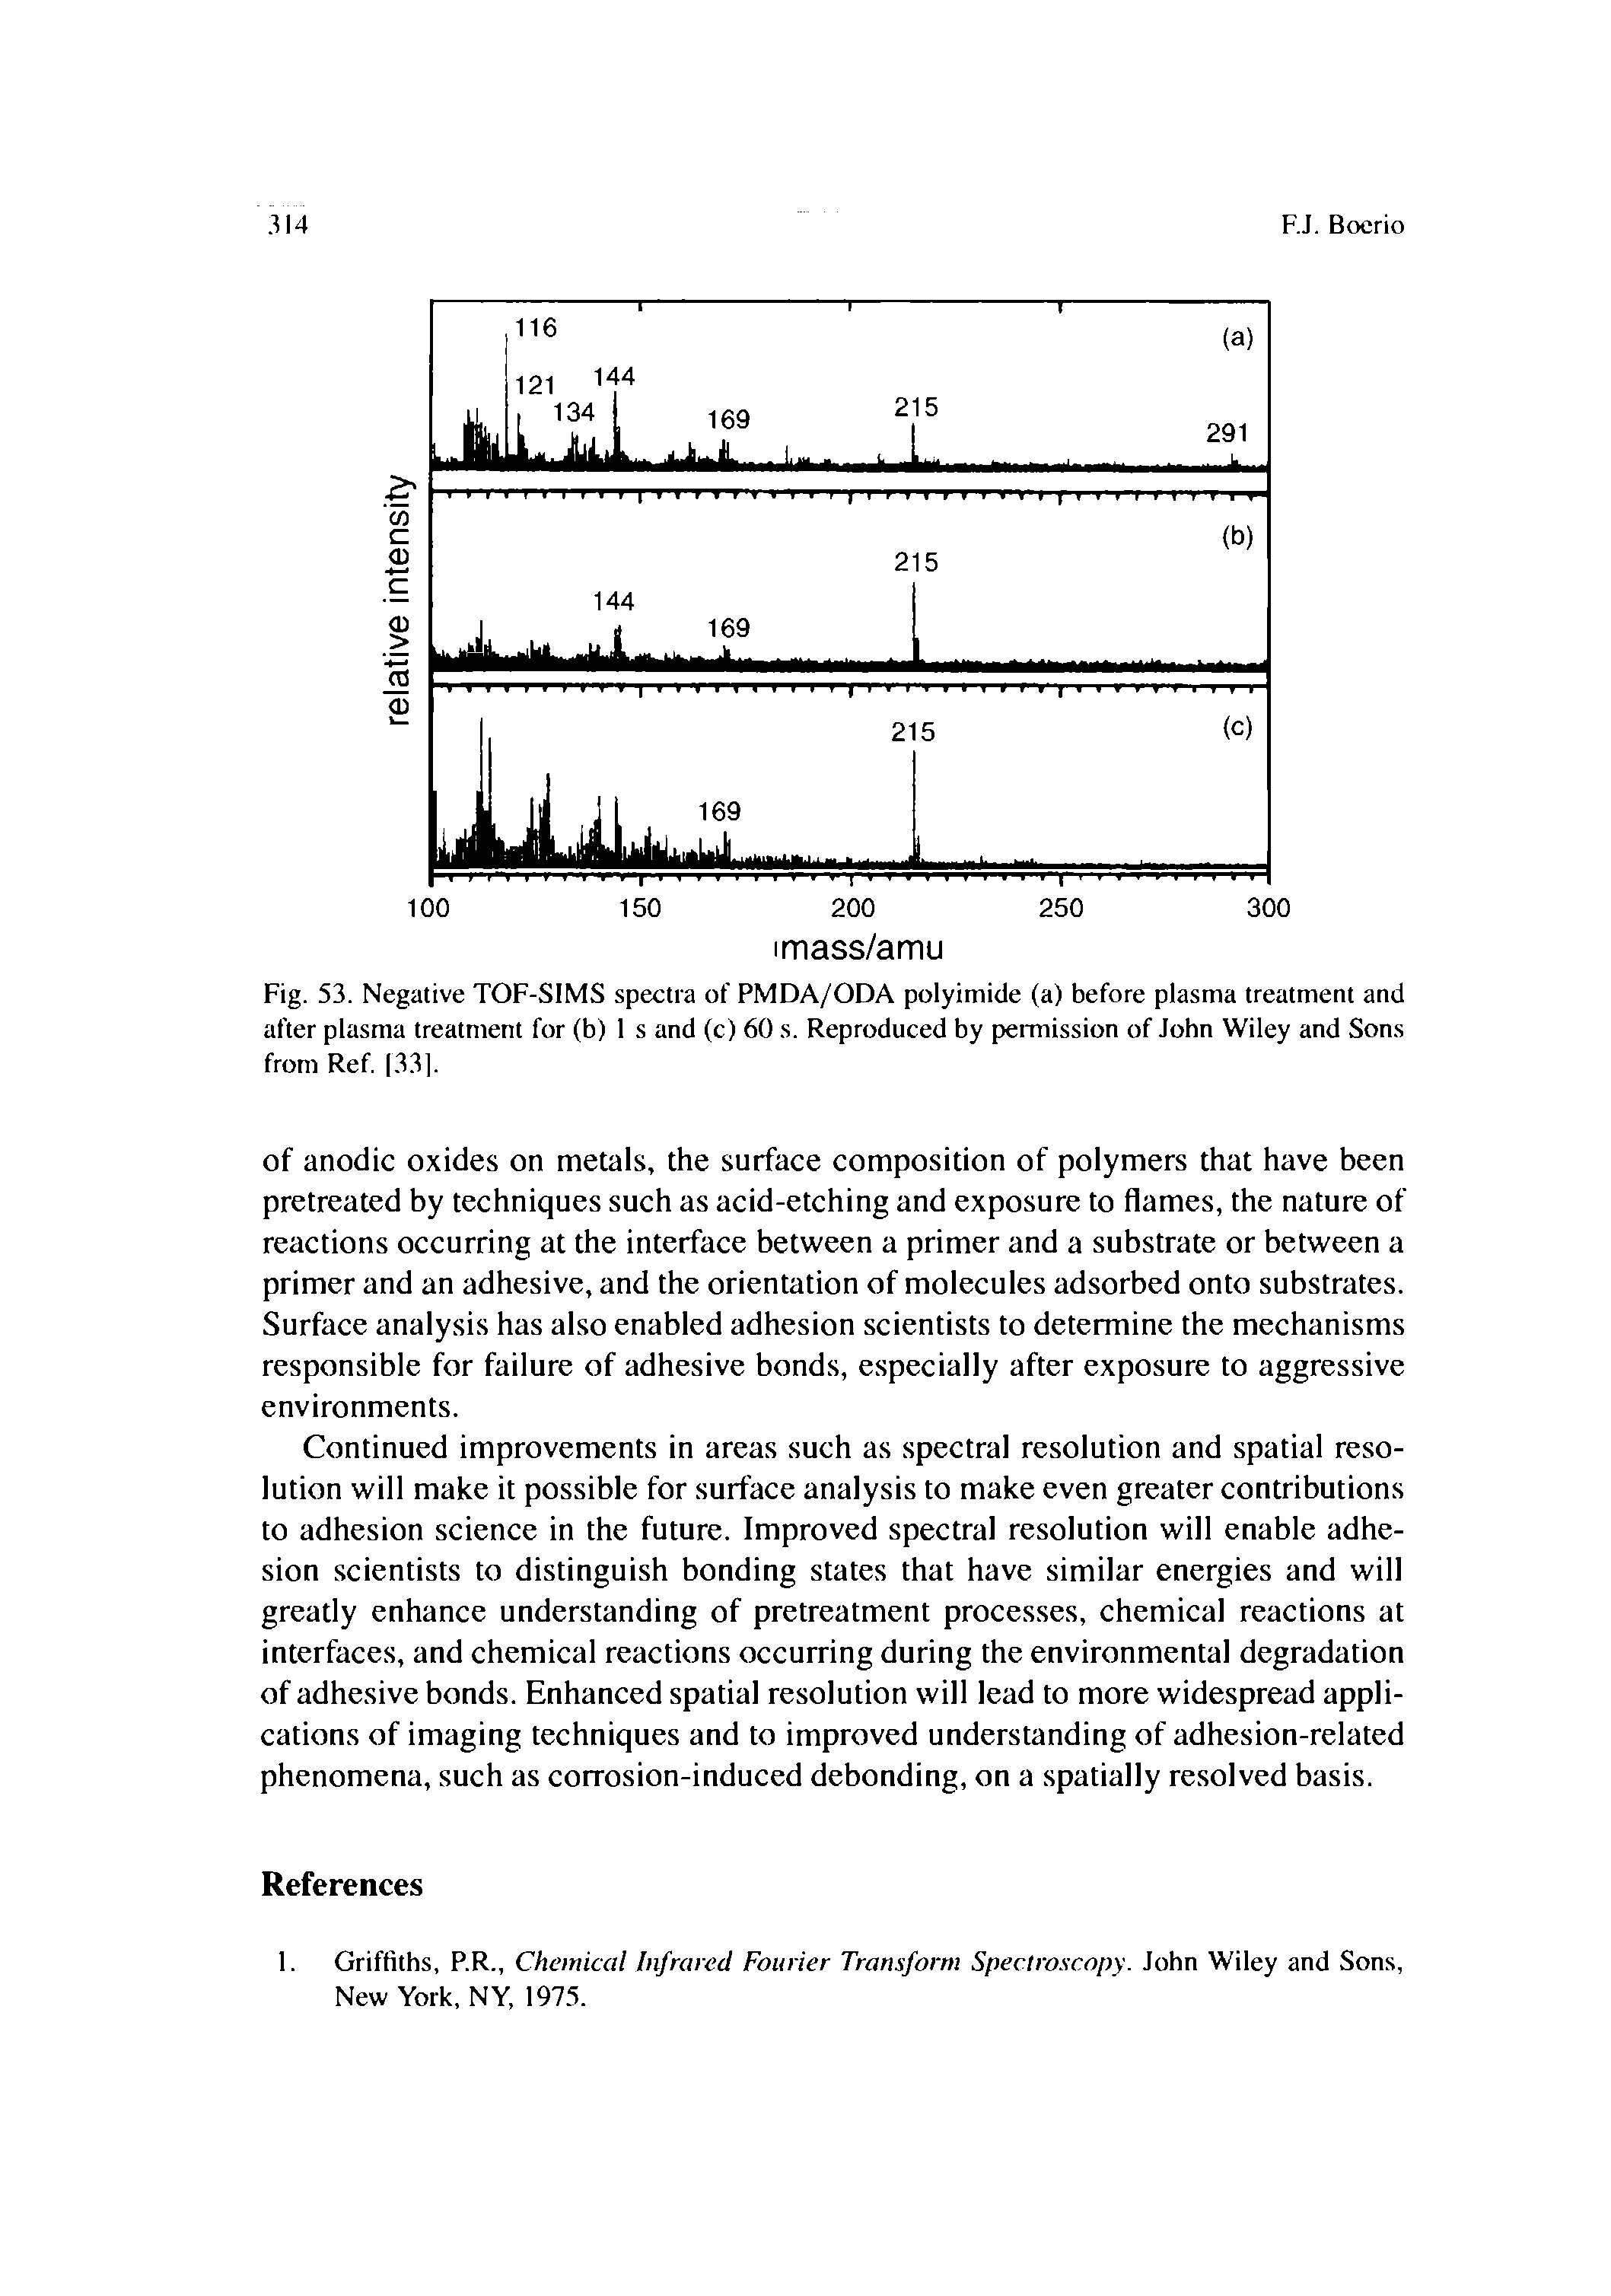 Fig. 53. Negative TOF-SIMS spectra of PMDA/ODA polyimide (a) before plasma treatment and after plasma treatment for (b) 1 s and (c) 60 s. Reproduced by permission of John Wiley and Sons from Ref. 33).